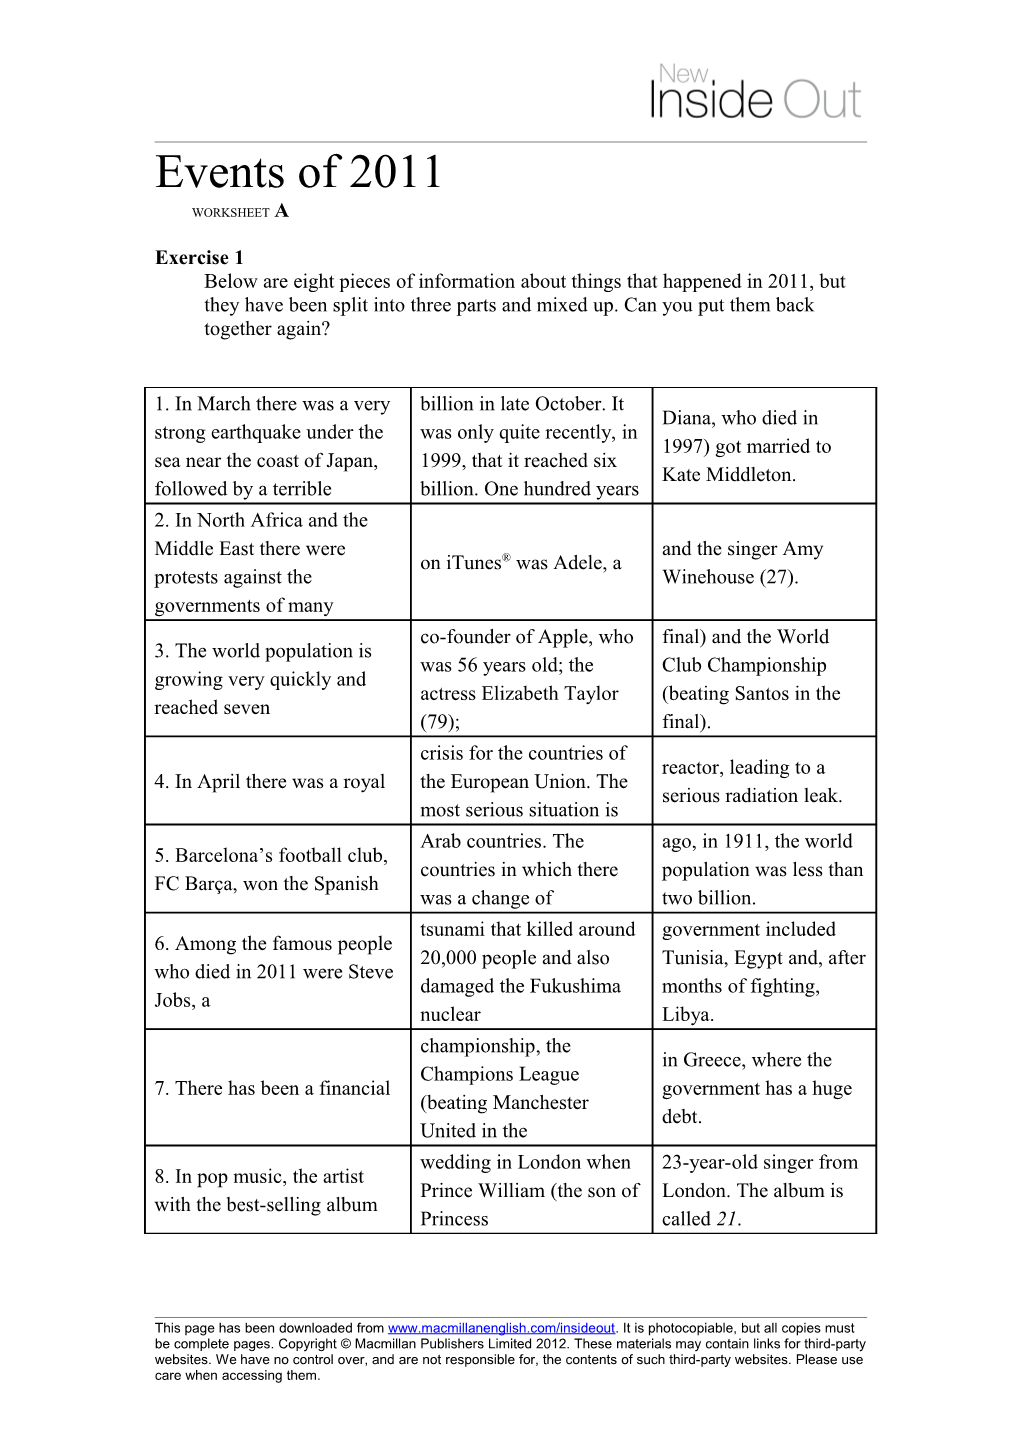 Events of 2011 Worksheet A